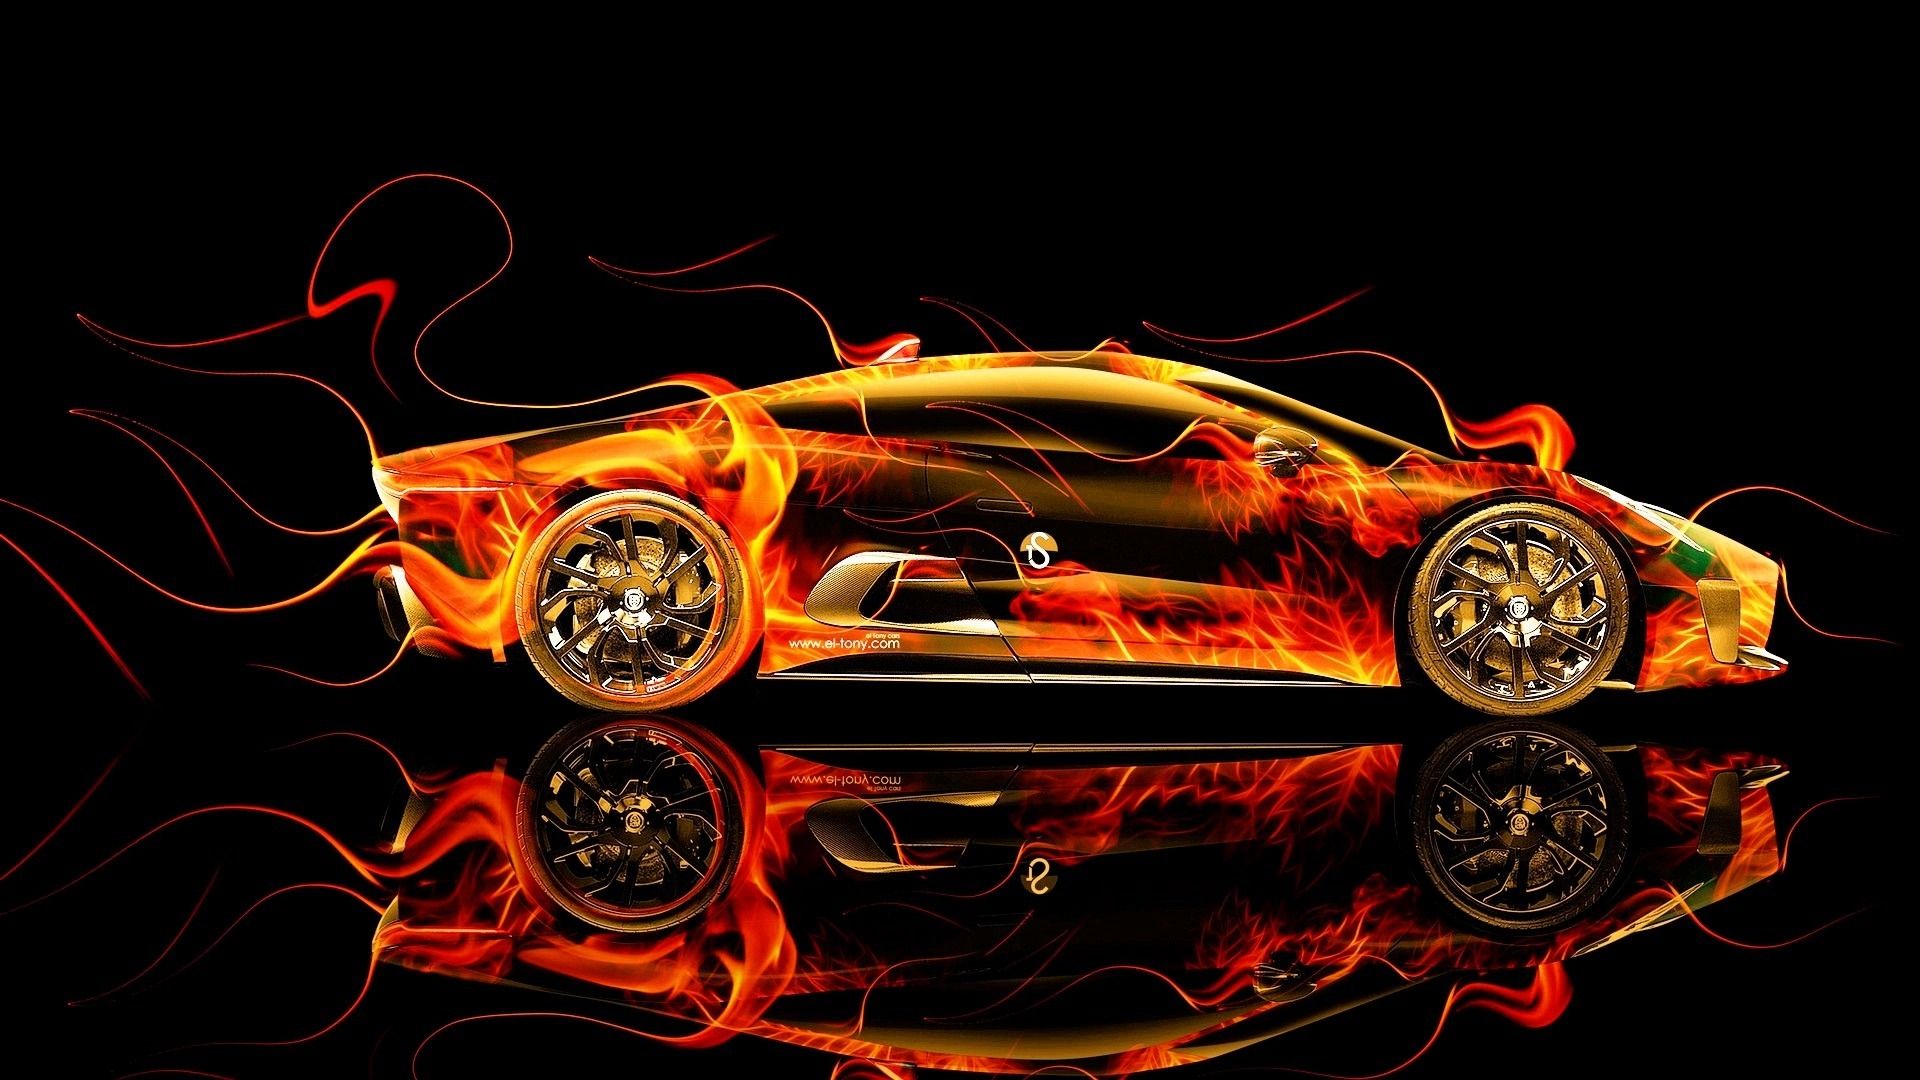 Design Talent Showcase Tony.com Brings Sensual Elements Fire And Water To YOUR Car Wallpaper 17